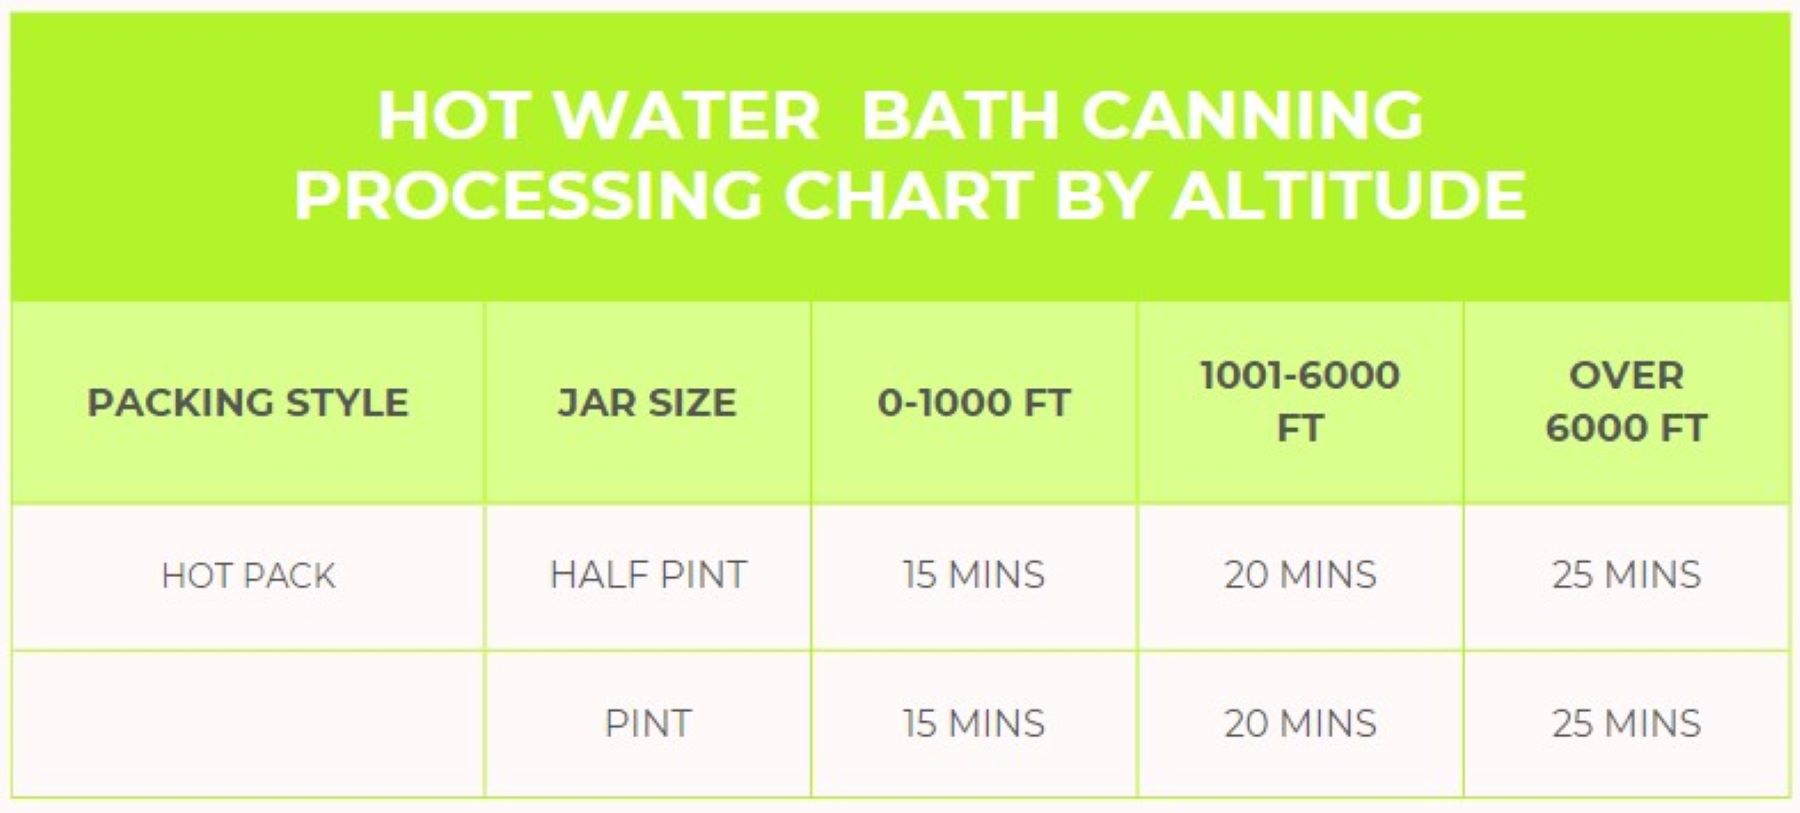 An altitude chart showing processing times for water bath canning.